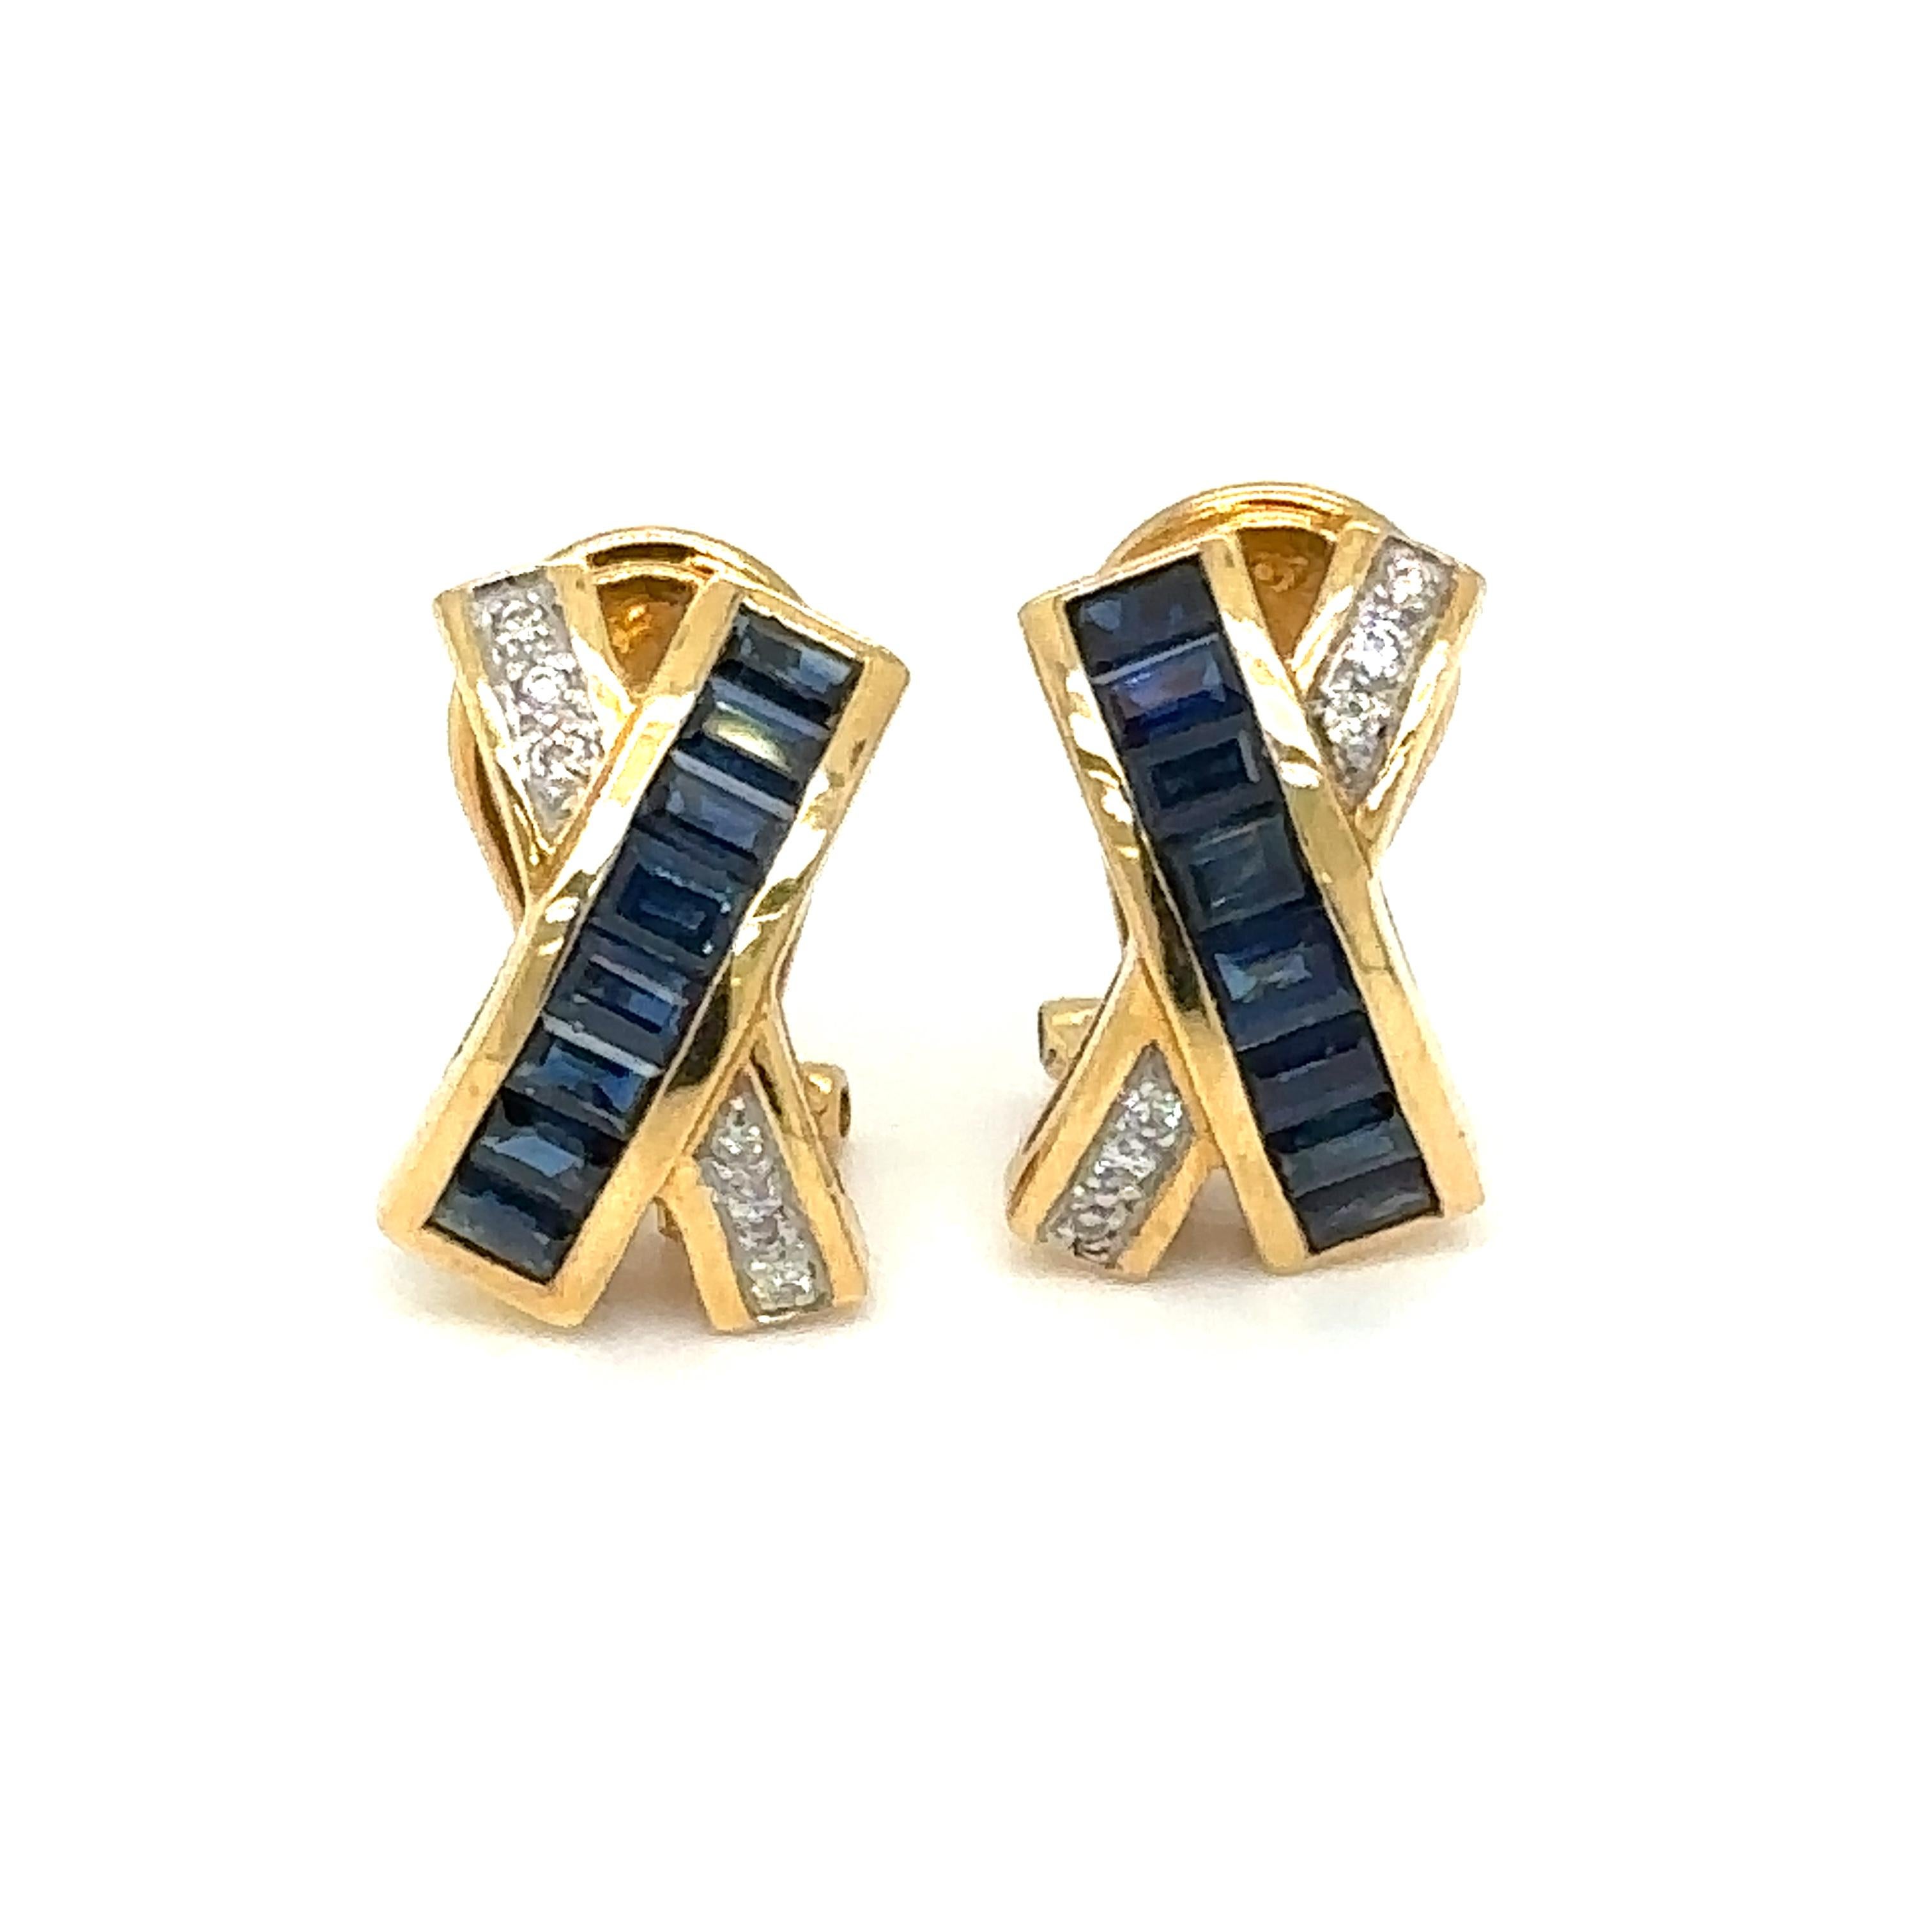 Item Details: These earrings by LE VIAN feature sapphires and diamonds in an X design with omega clips. These earrings convert to pierced and non-pierced. Another Le Vian unique design with the a beautiful color combination of sapphires and